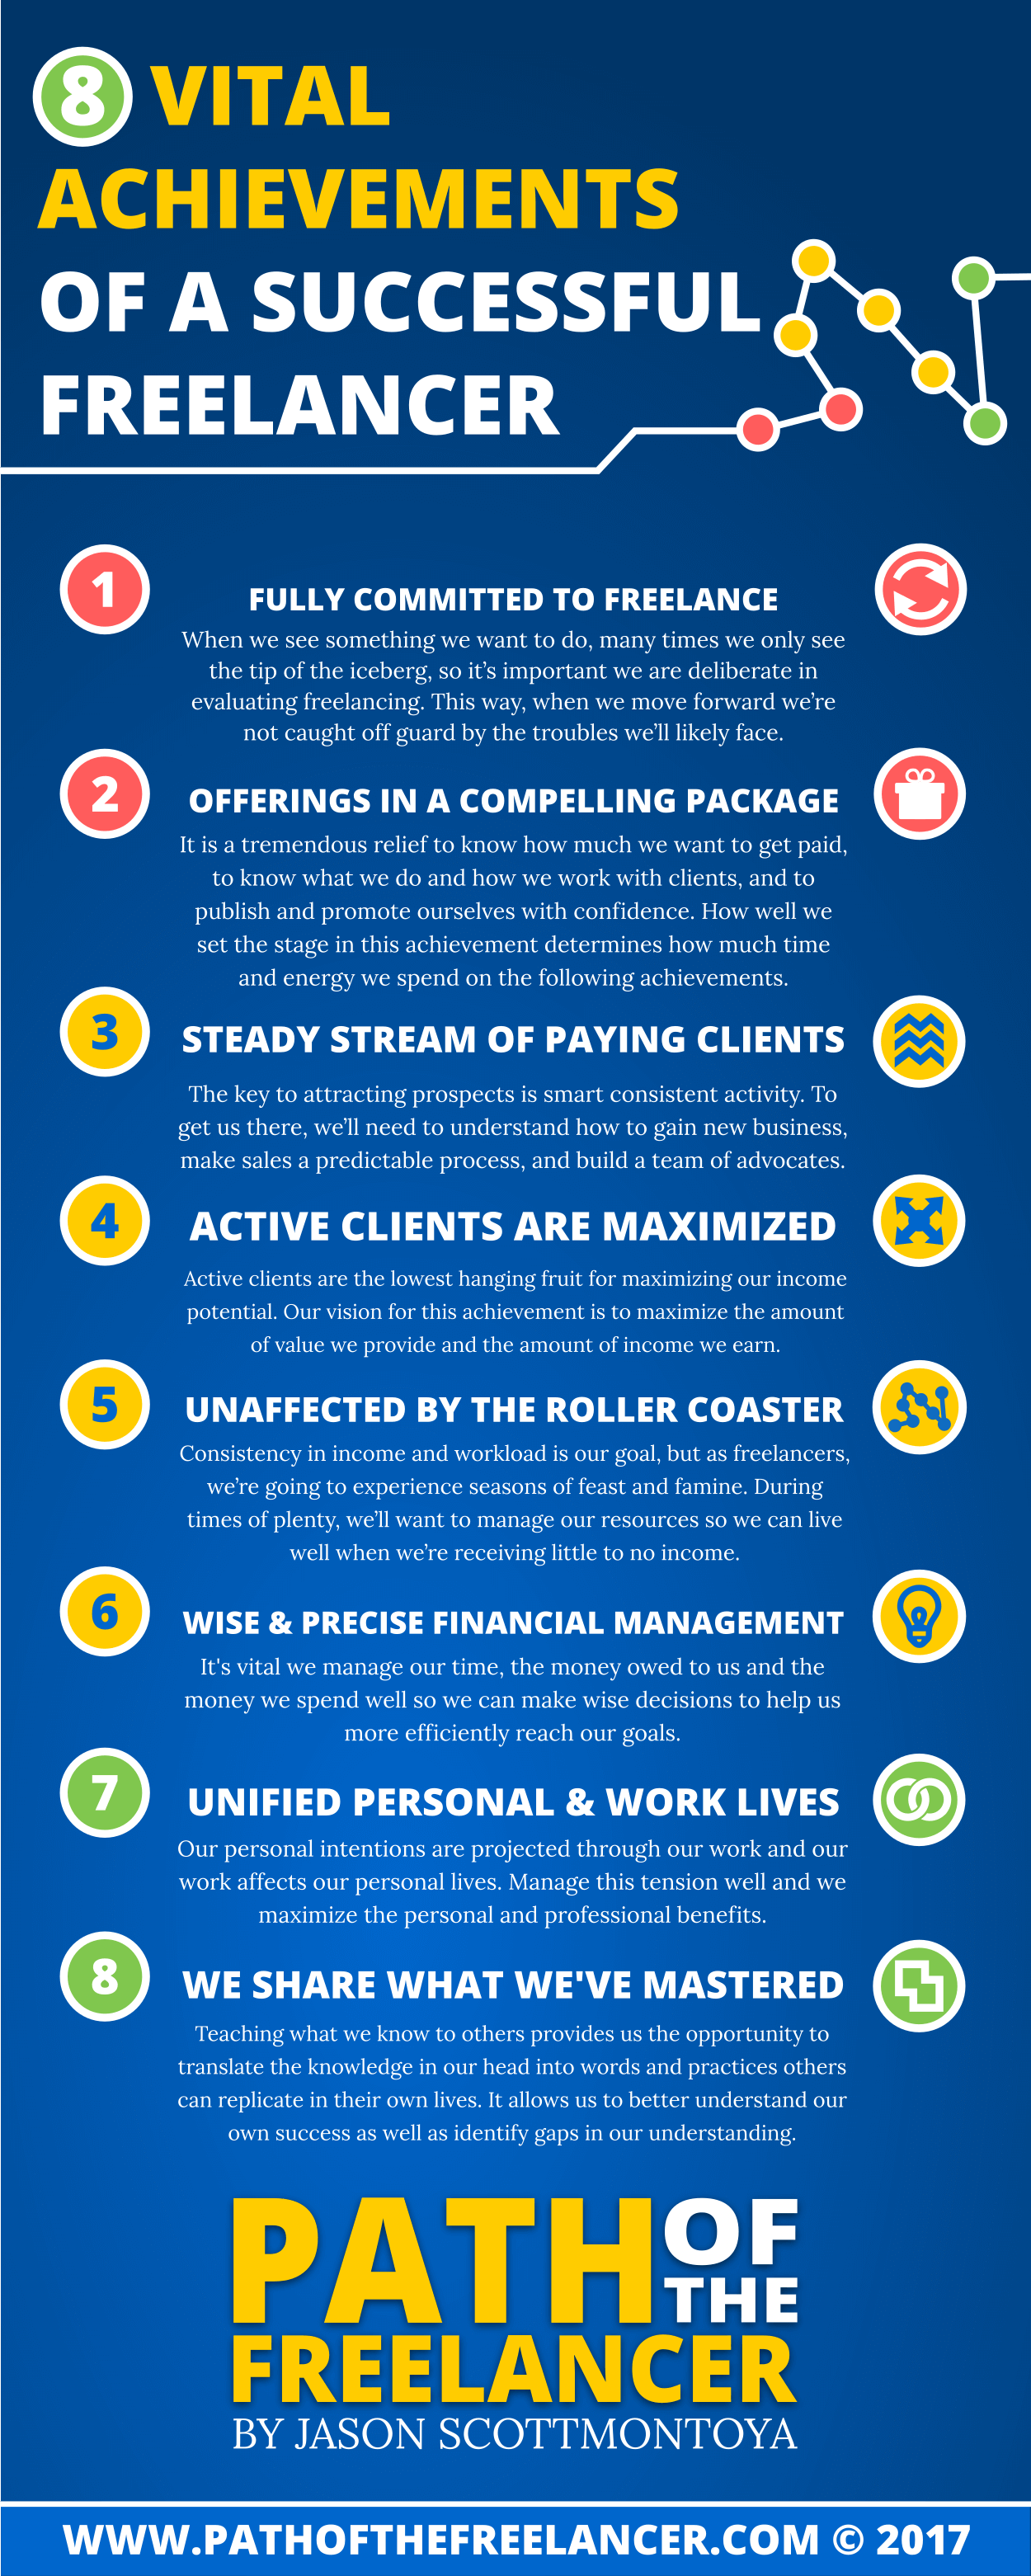 Path Of The Freelancer Achievements Infographic